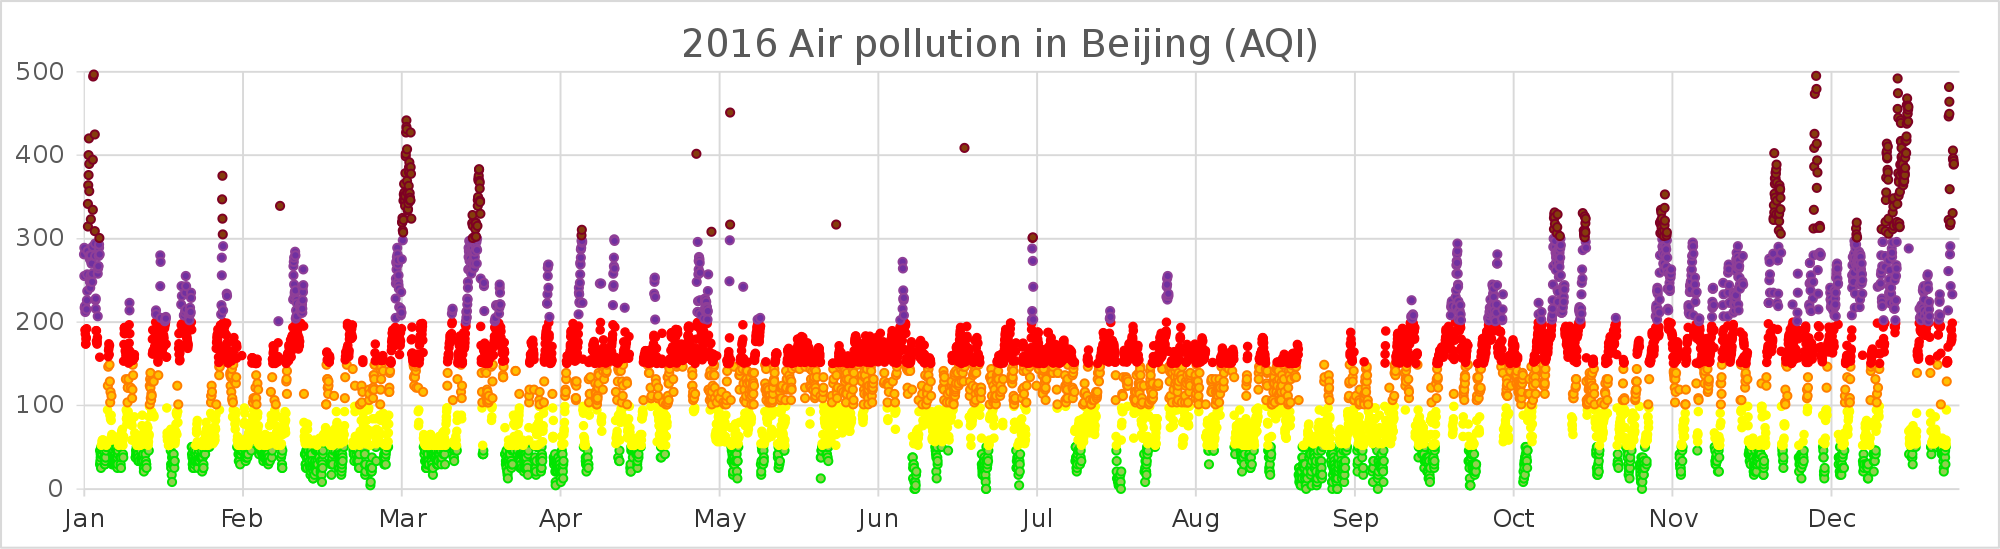 2016 Air pollution in Beijing as measured by Air Quality Index (AQI)@media(min-width:720px){.mw-parser-output .columns-start .column{float:left;min-width:20em}.mw-parser-output .columns-2 .column{width:50%}.mw-parser-output .columns-3 .column{width:33.3%}.mw-parser-output .columns-4 .column{width:25%}.mw-parser-output .columns-5 .column{width:20%)) .mw-parser-output .legend{page-break-inside:avoid;break-inside:avoid-column}.mw-parser-output .legend-color{display:inline-block;min-width:1.25em;height:1.25em;line-height:1.25;margin:1px 0;text-align:center;border:1px solid black;background-color:transparent;color:black}.mw-parser-output .legend-text{}   Severely polluted     Heavily polluted     Moderately polluted      Lightly polluted     Good    Excellent